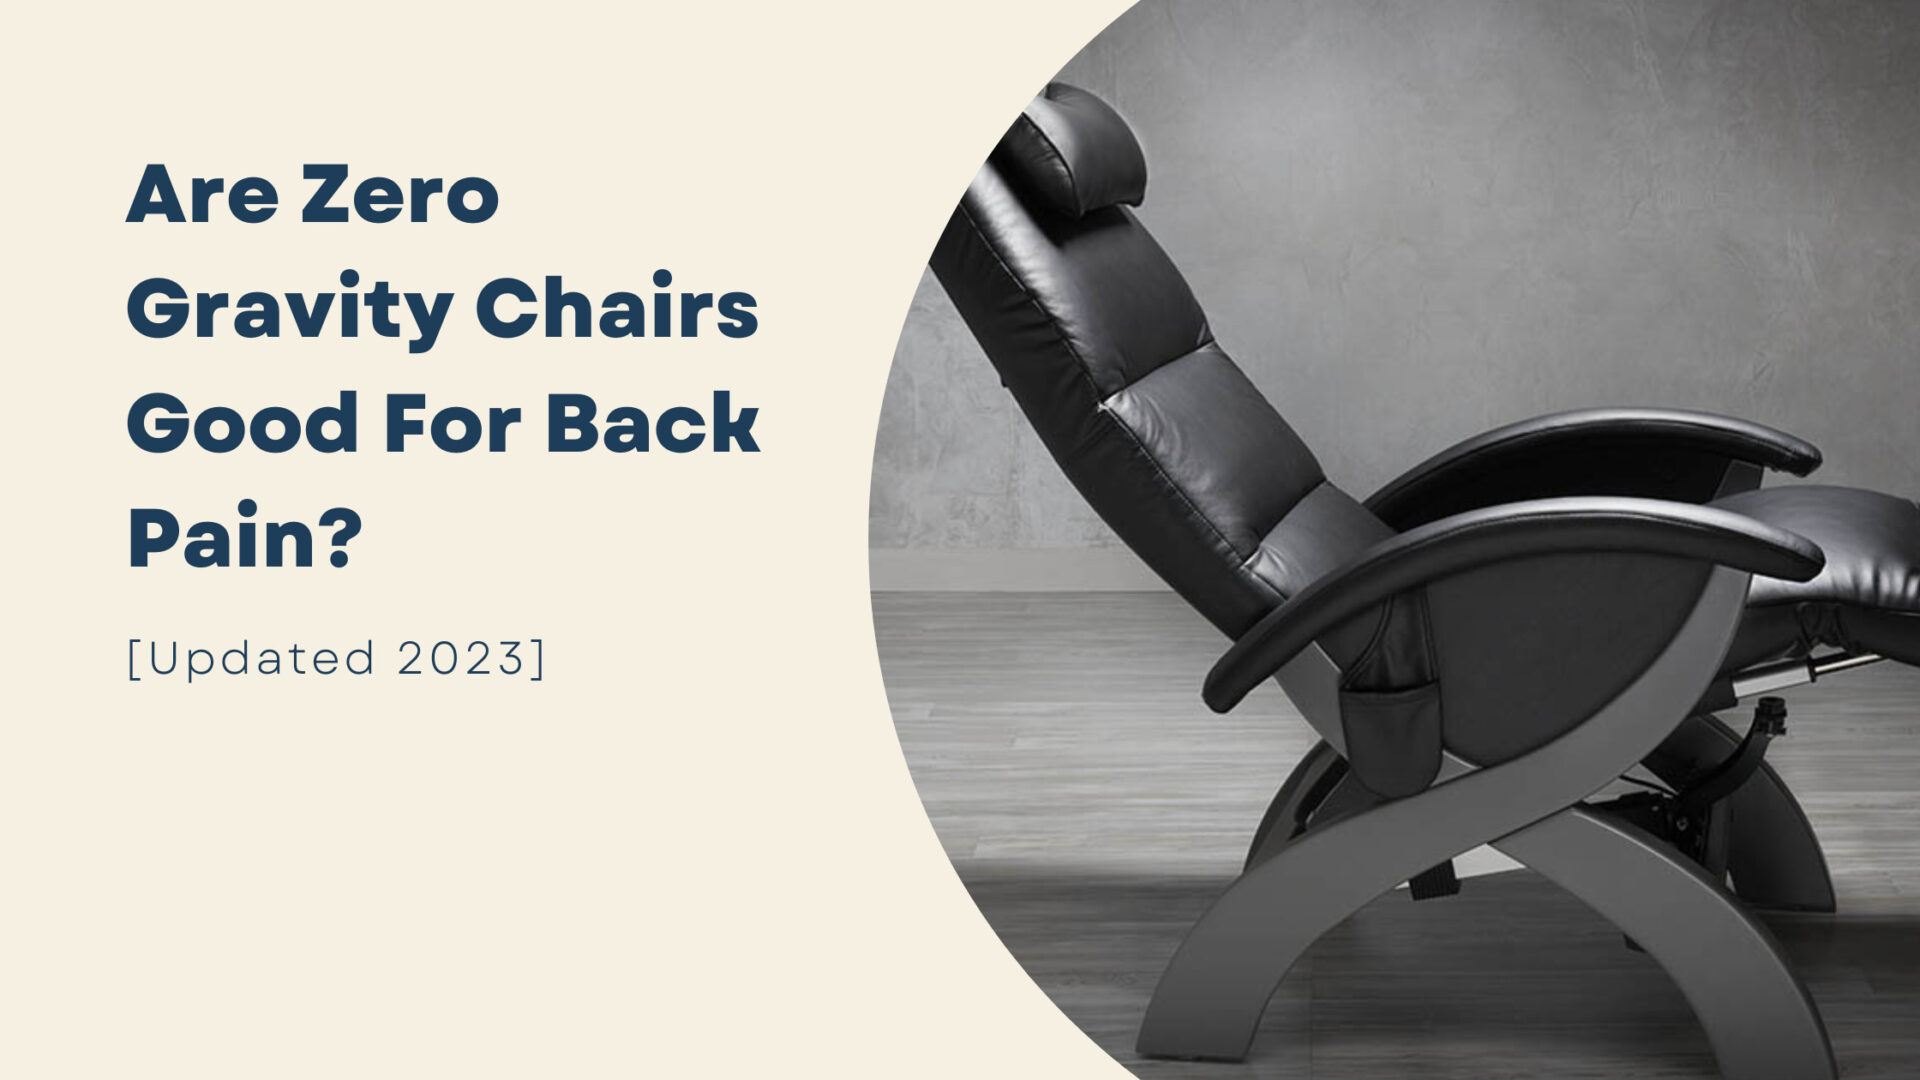 are zero gravity chairs good for back pain